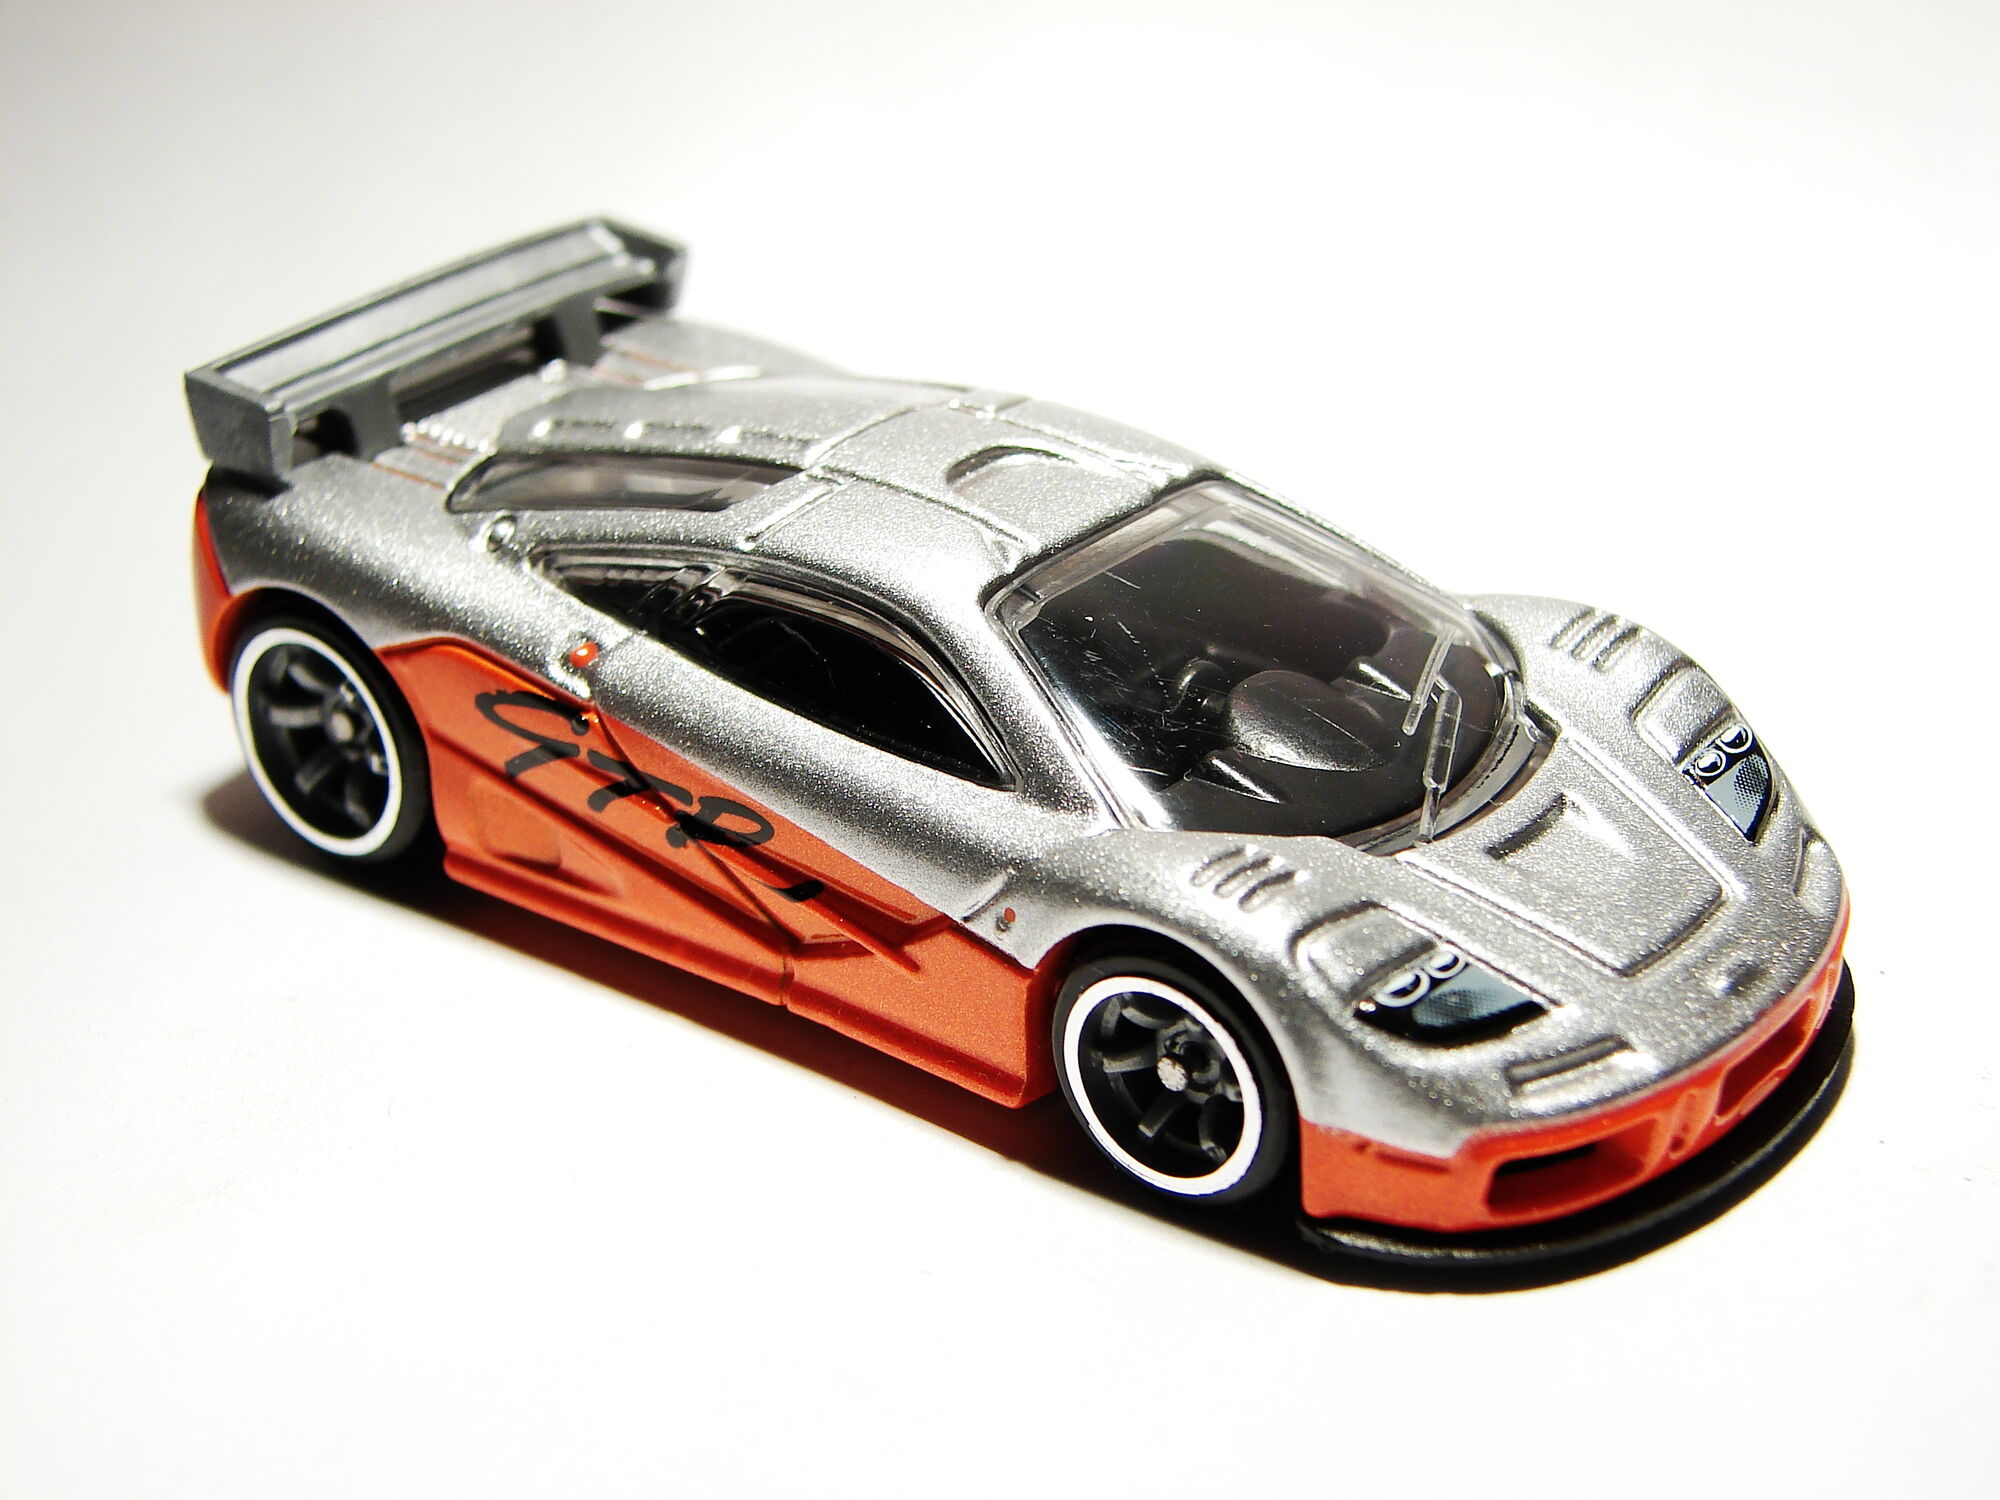 The McLaren F1 GTR is a high performance racing version of the standard McL...